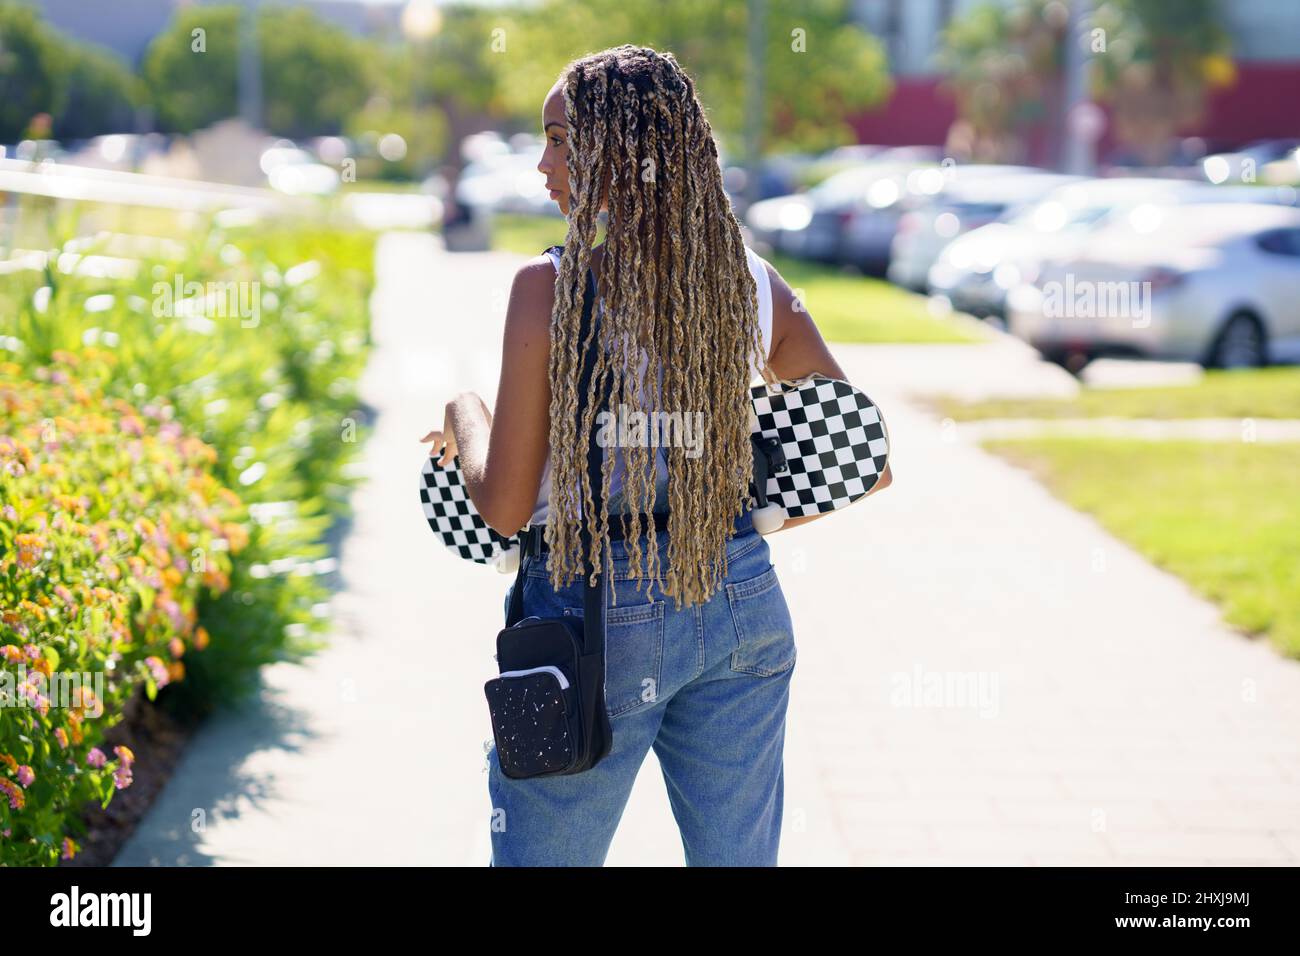 Black woman with colourful braided hairstyle, wearing a skateboard. Stock Photo